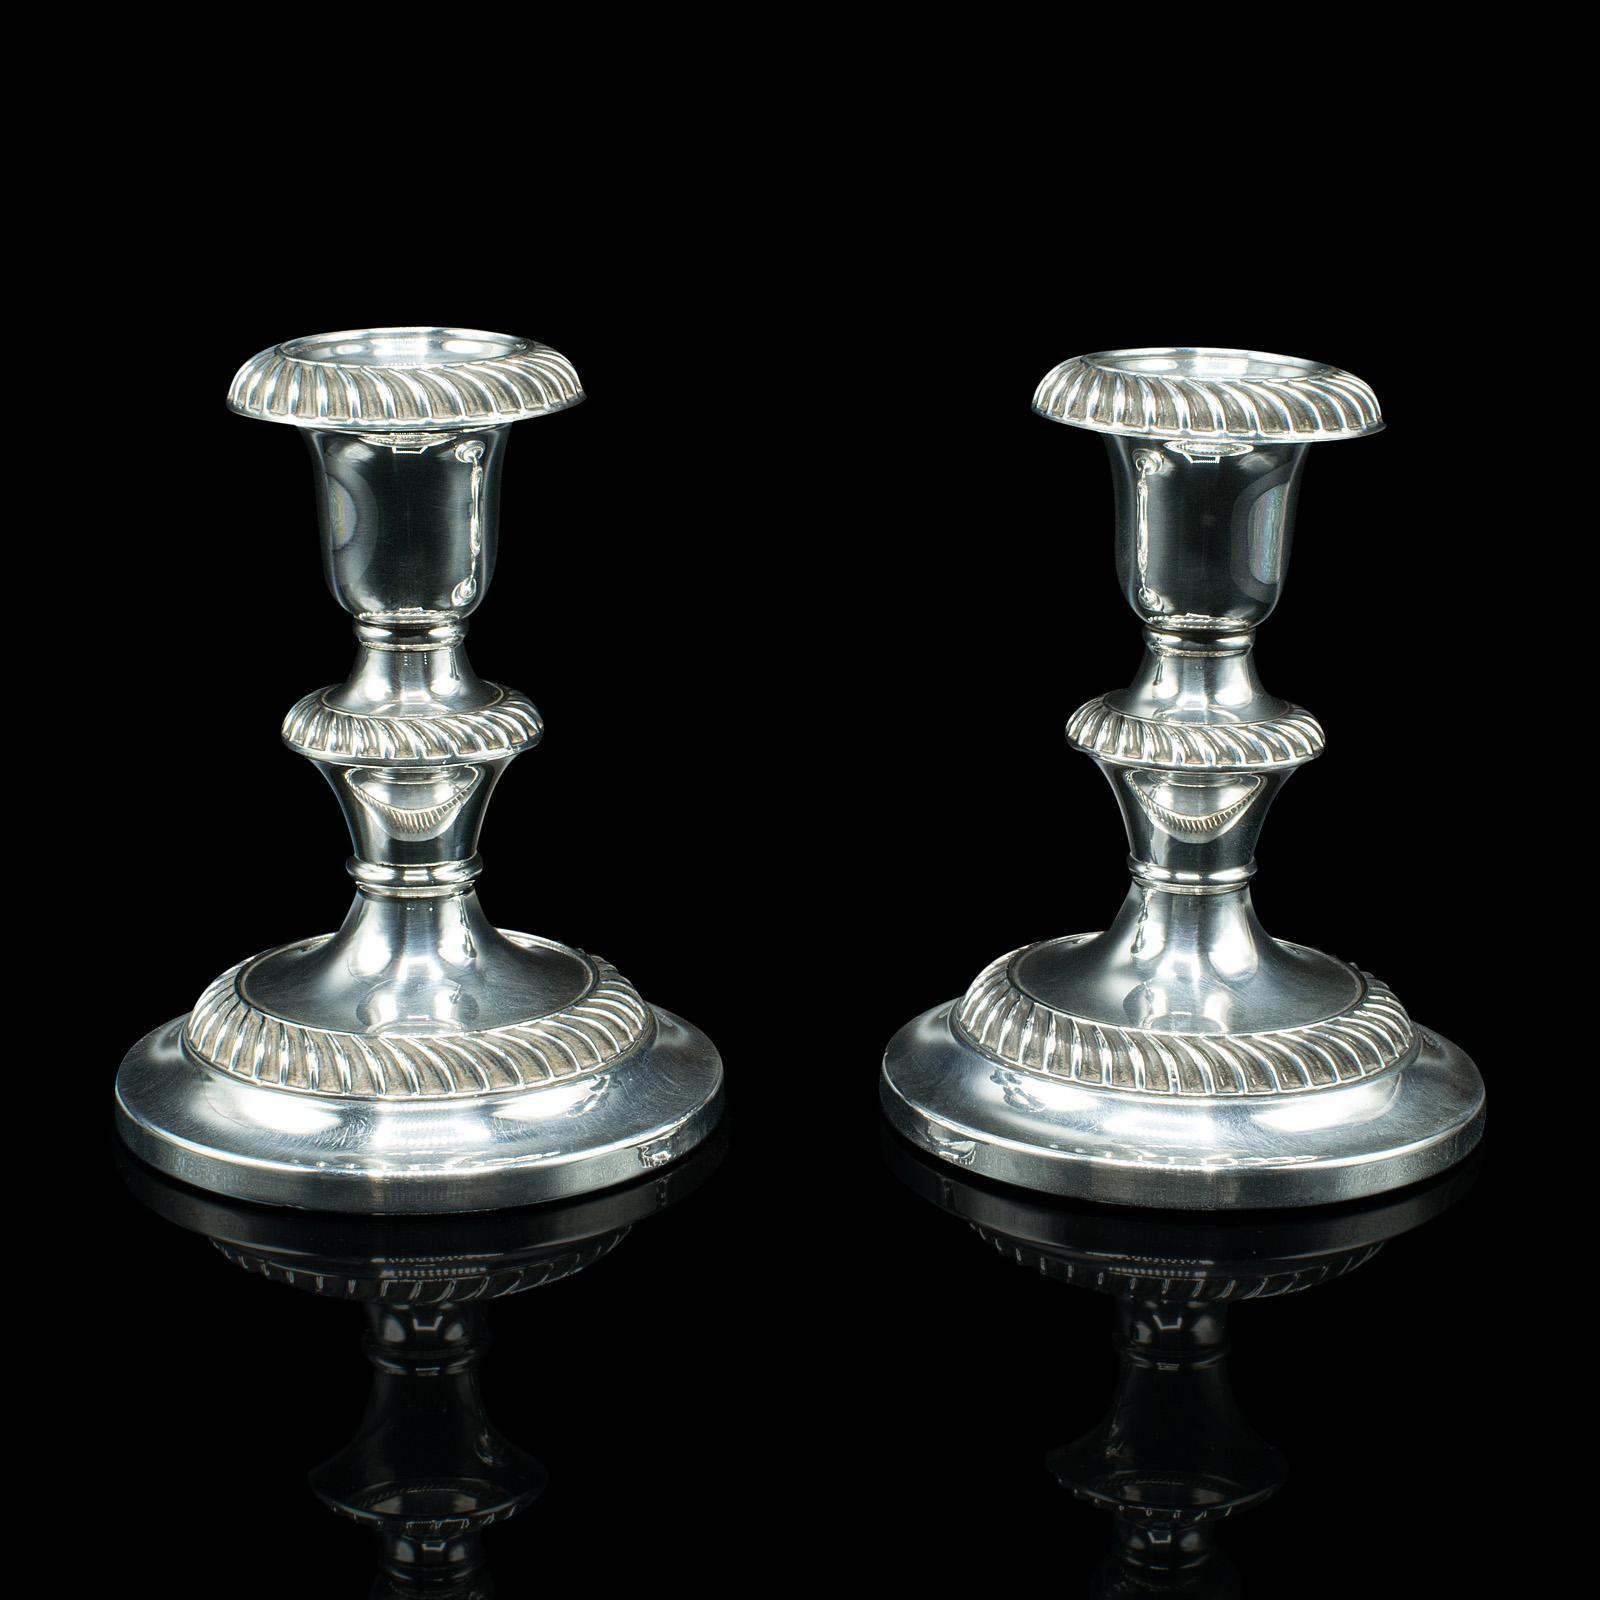 This is a pair of antique candlesticks. An English, silver plate candle sconce, dating to the Edwardian period, circa 1910.

Elegant candlesticks with bright appearance and fine detail
Displaying a desirable aged patina throughout
Superb, reflective